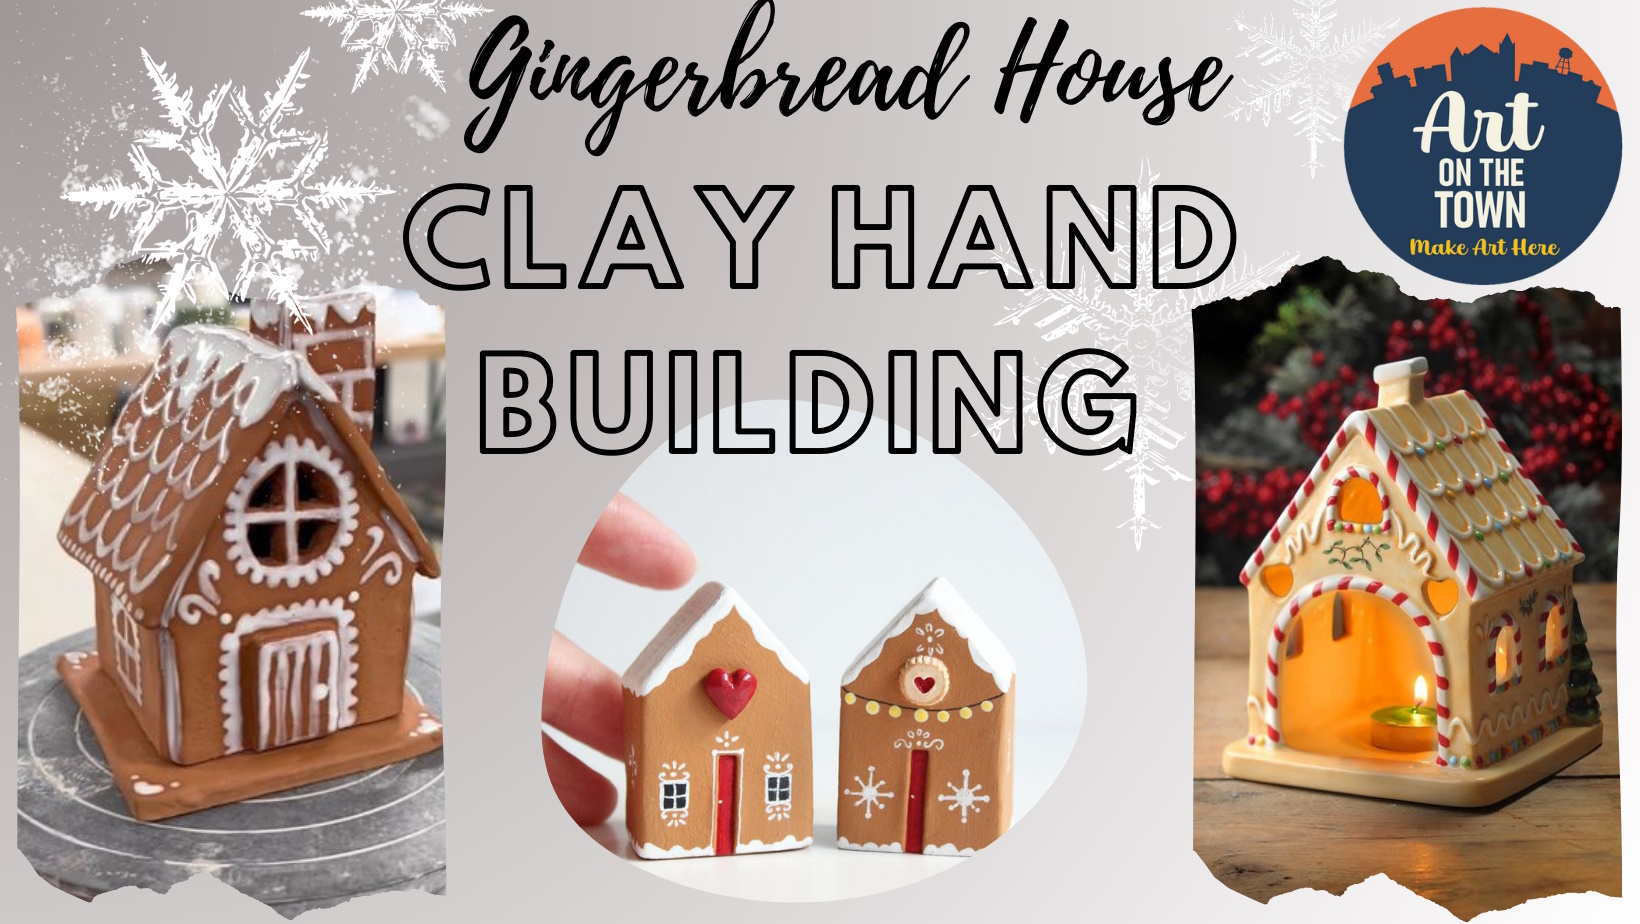 Gingerbread House Clay Hand Building